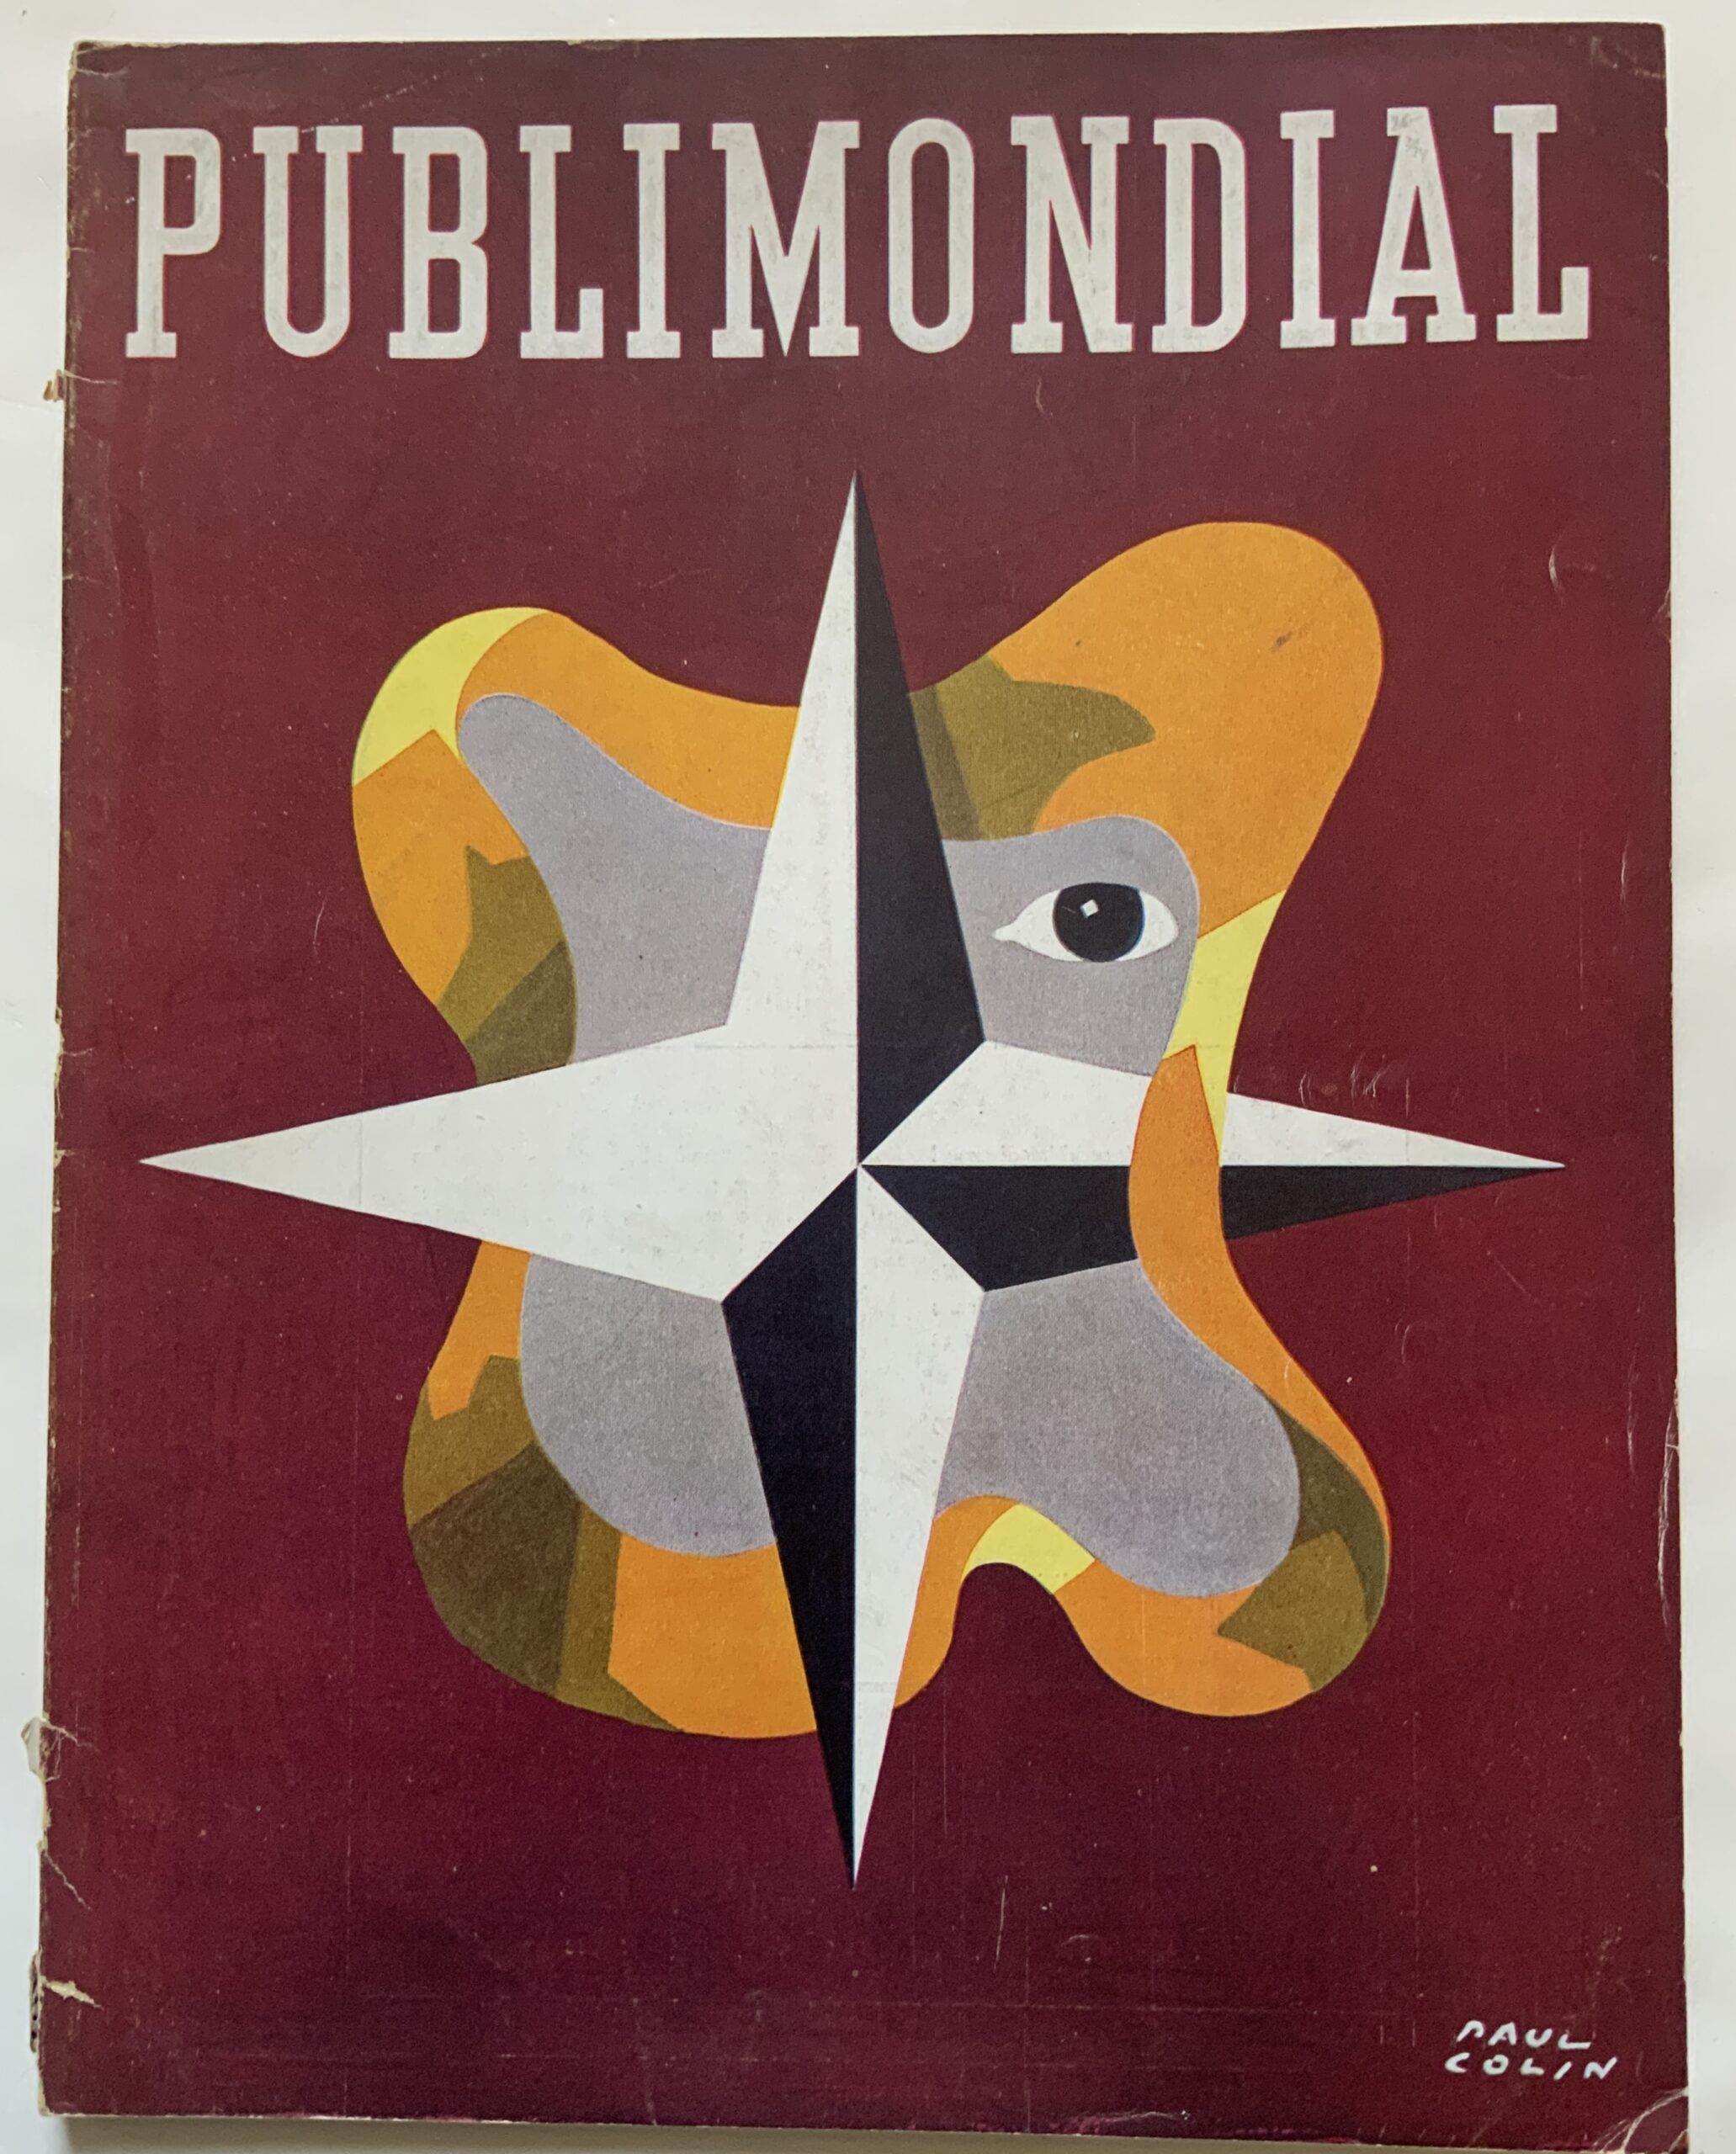 M431	PUBLIMONDIAL 14 - INTERNATIONAL REVIEW OF GRAPHIC ARTS AND ADVERTISING TECHNIQUES